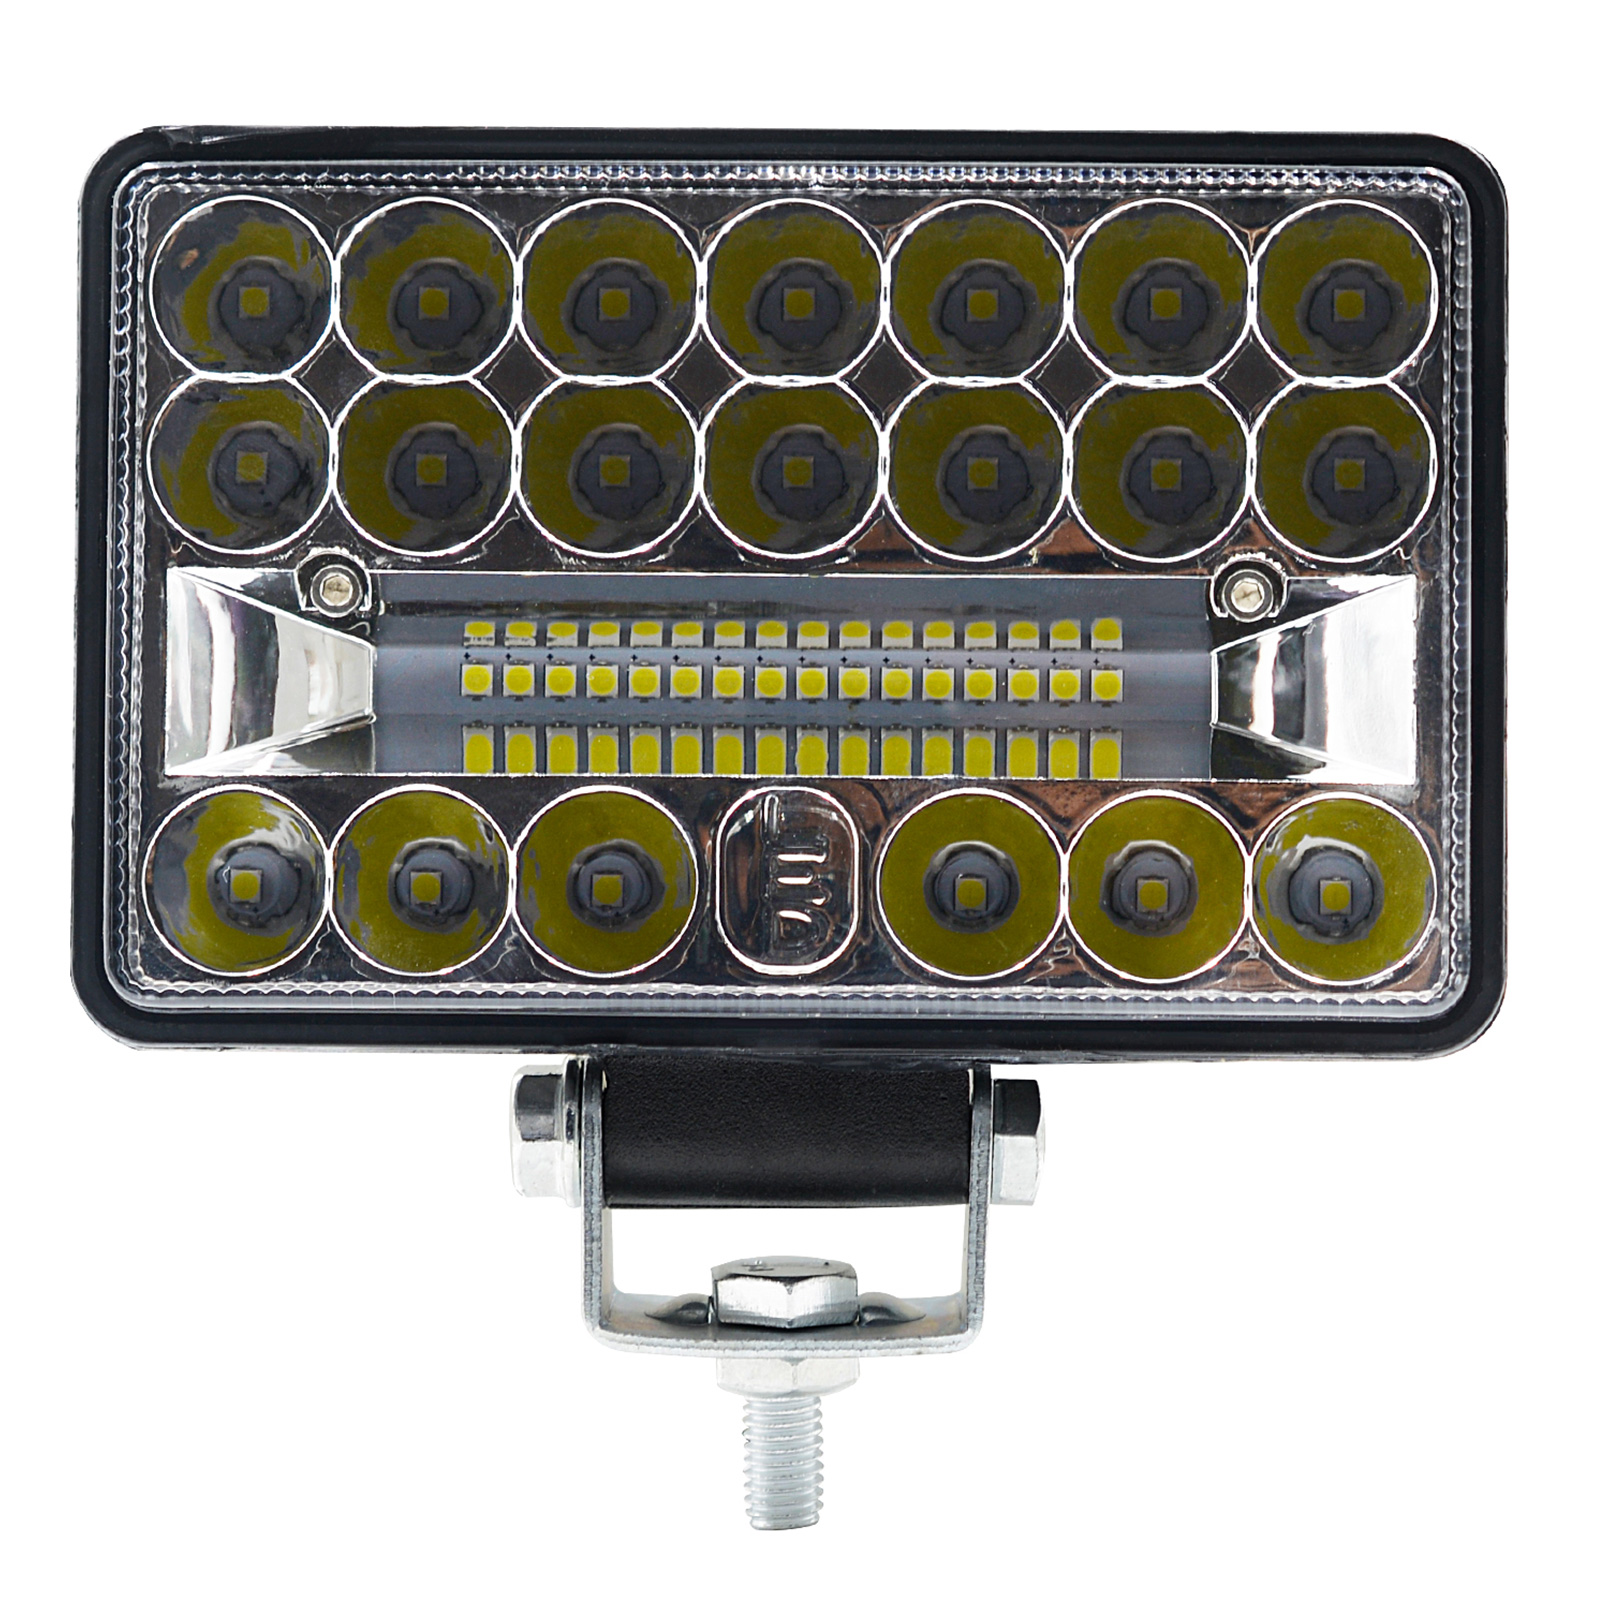 60W Four-Inch Square Dual Headlight LED Work Light for DC12-80V Motorcycles Cars Atvs Off-Road and Vehicles - Auto GoShop